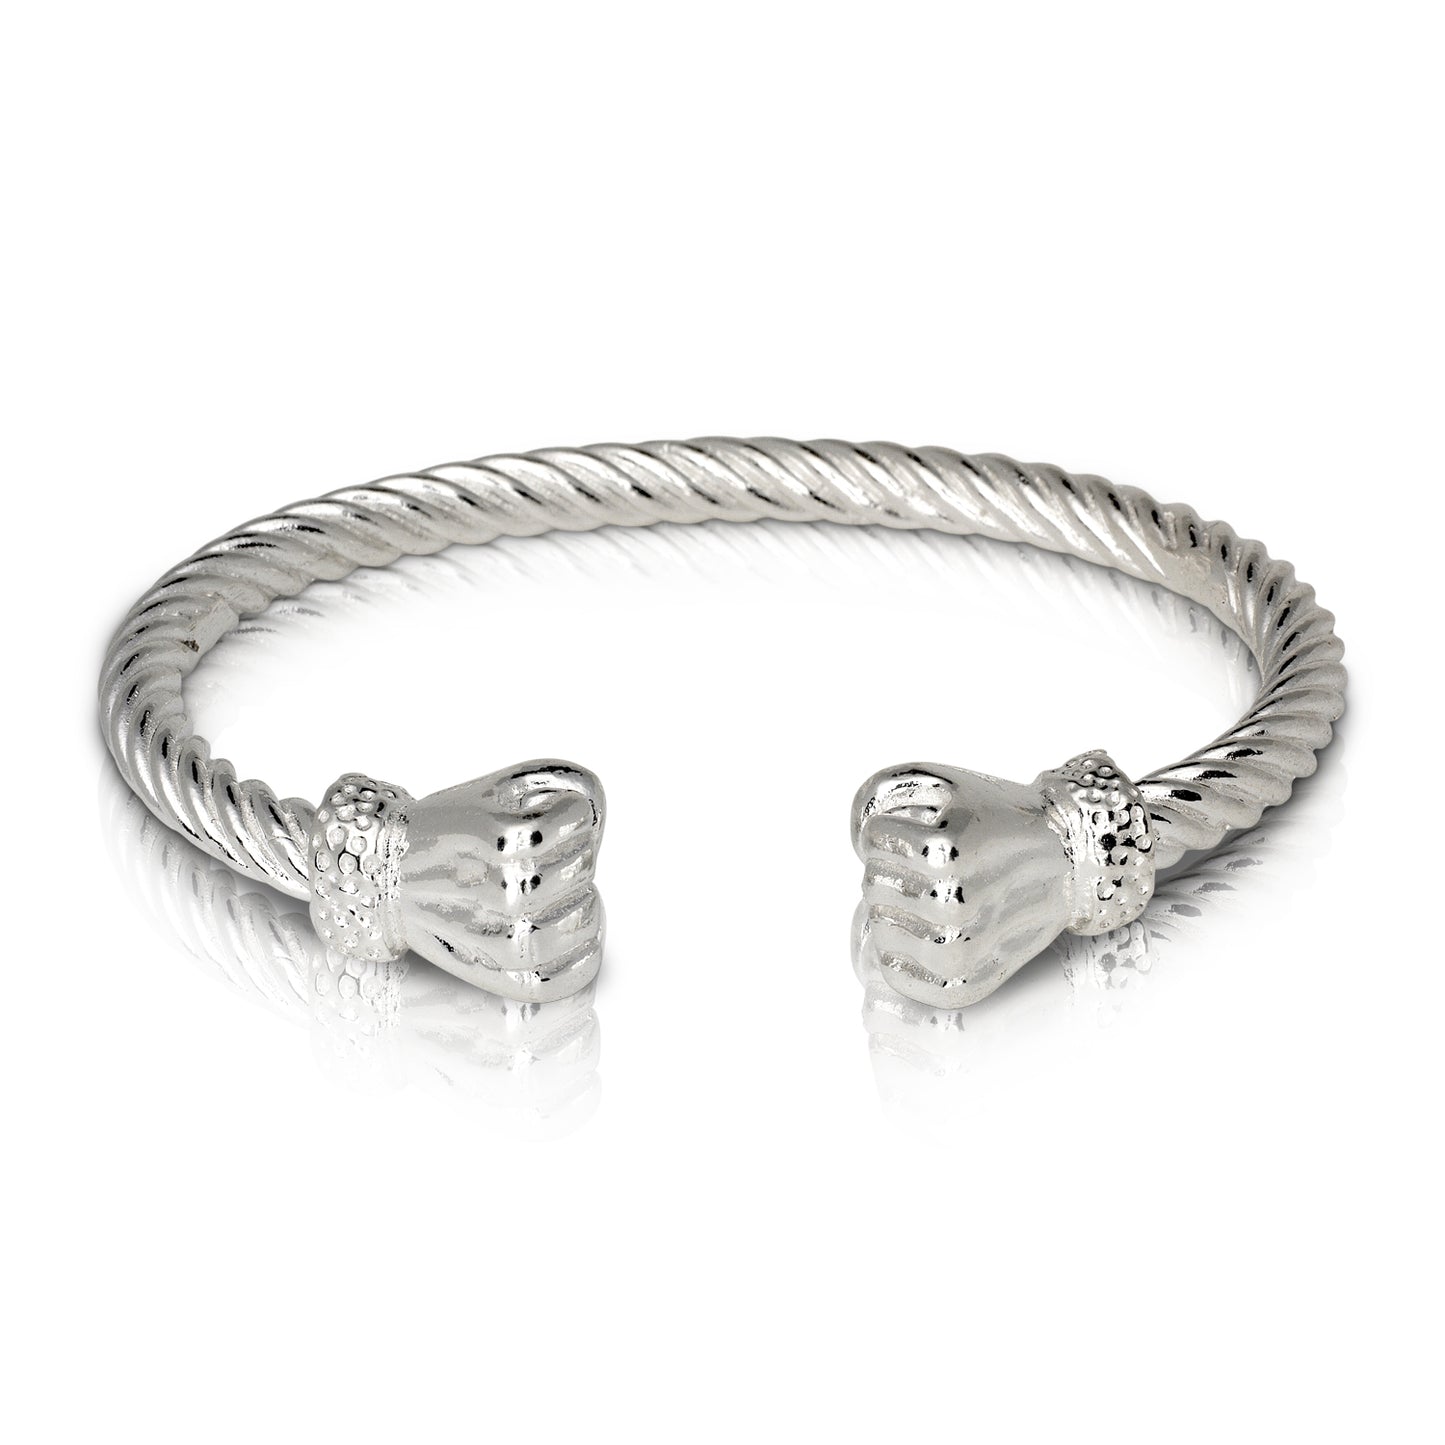 Better Jewelry Fist Ends Coiled Rope West Indian Bangle .925 Sterling Silver (1 piece)